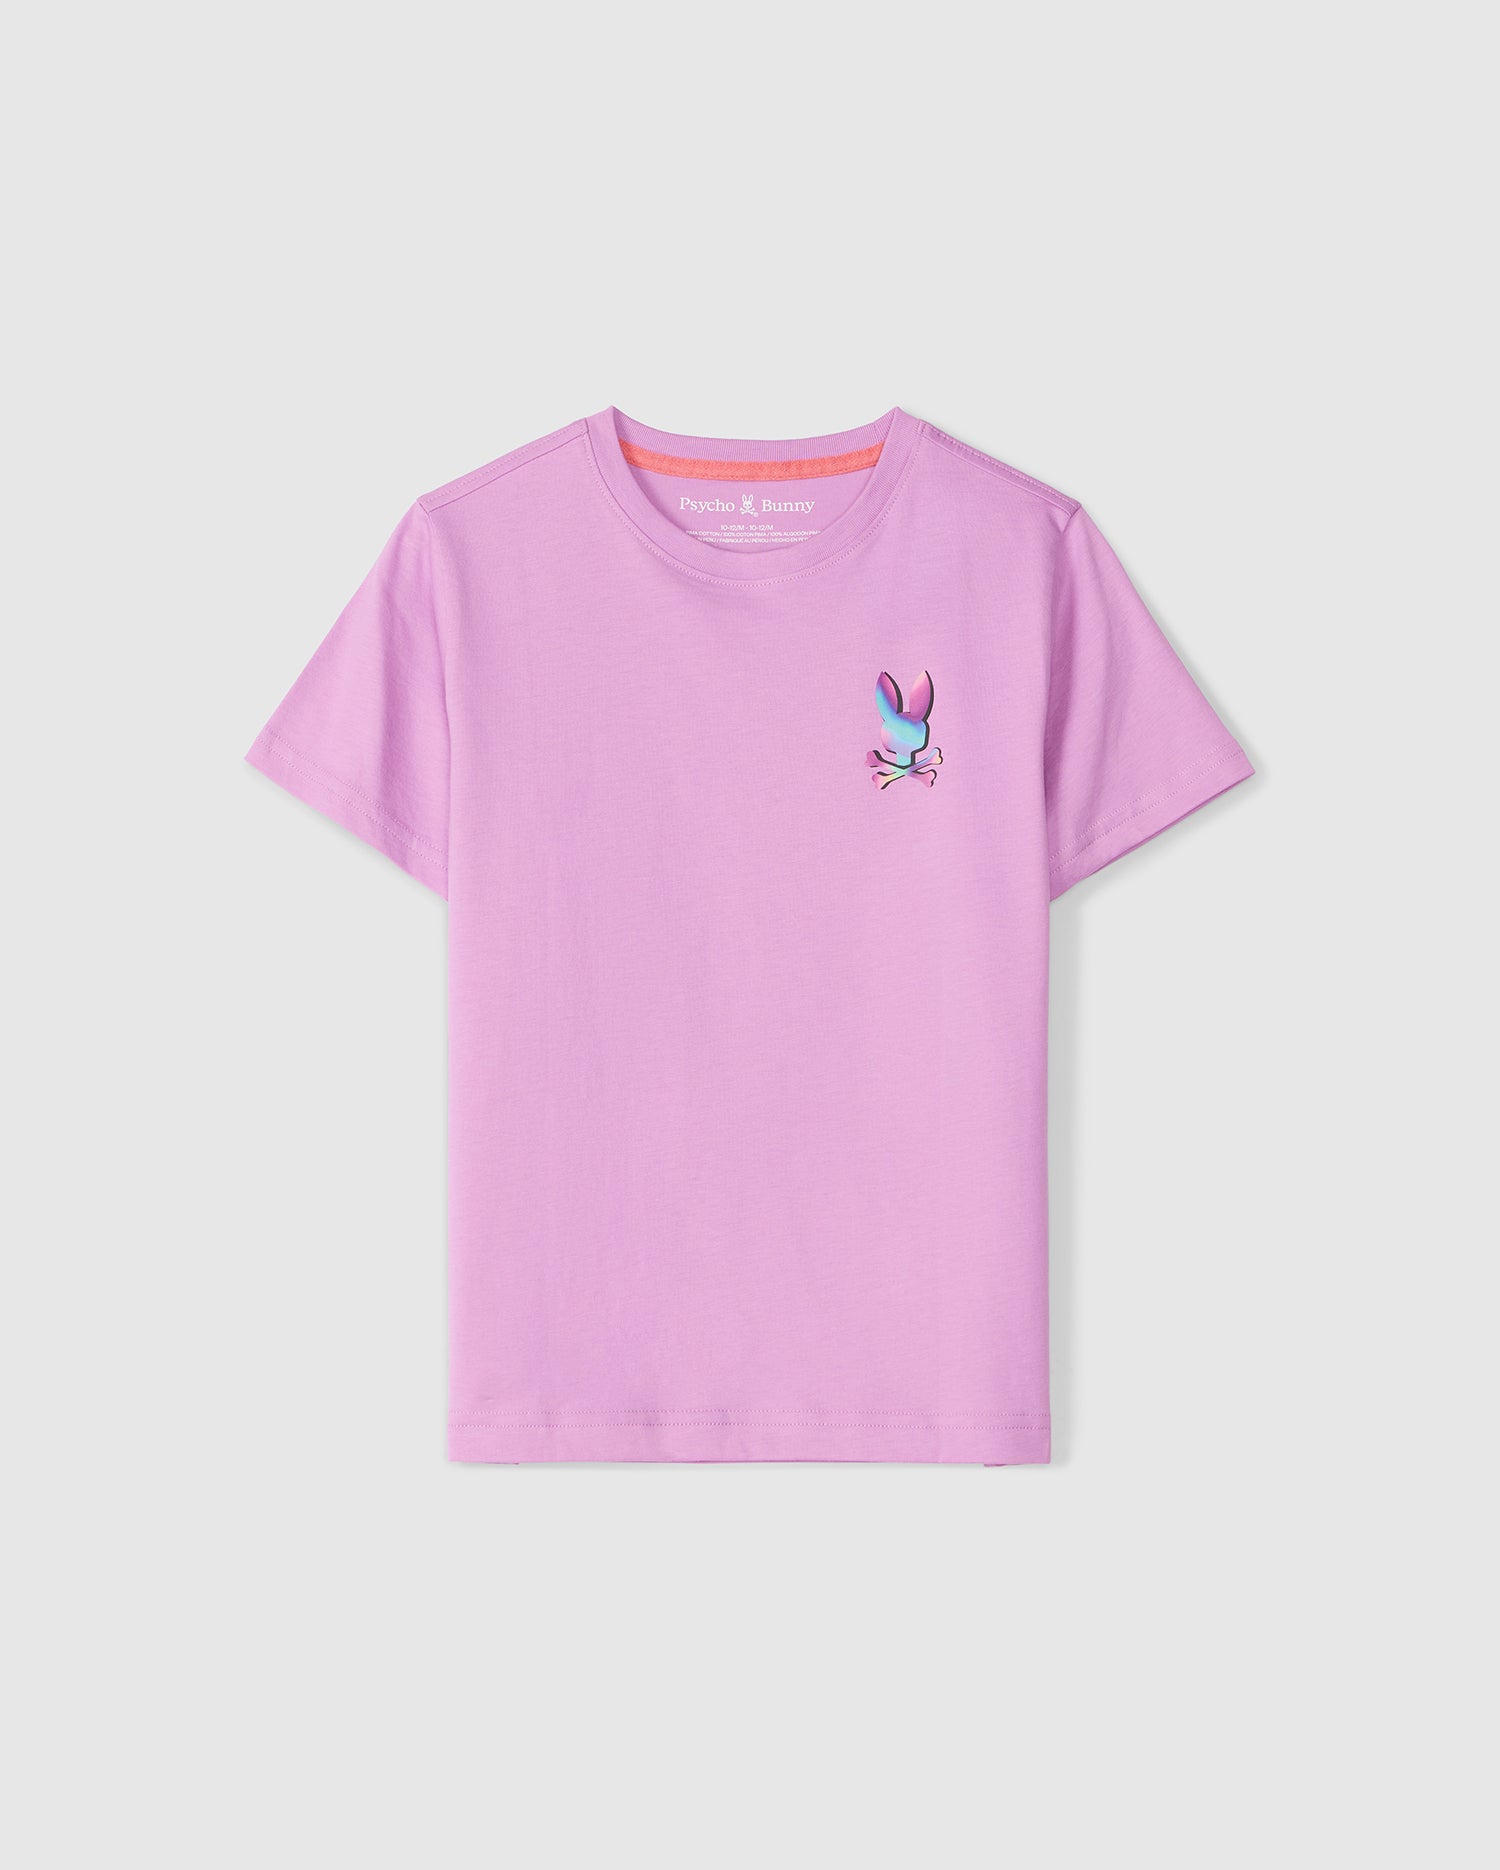 A pink children's KIDS TYLER BACK GRAPHIC TEE - B0U674C200 from Psycho Bunny with a small bunny print on the left chest area, displayed against a plain white background.